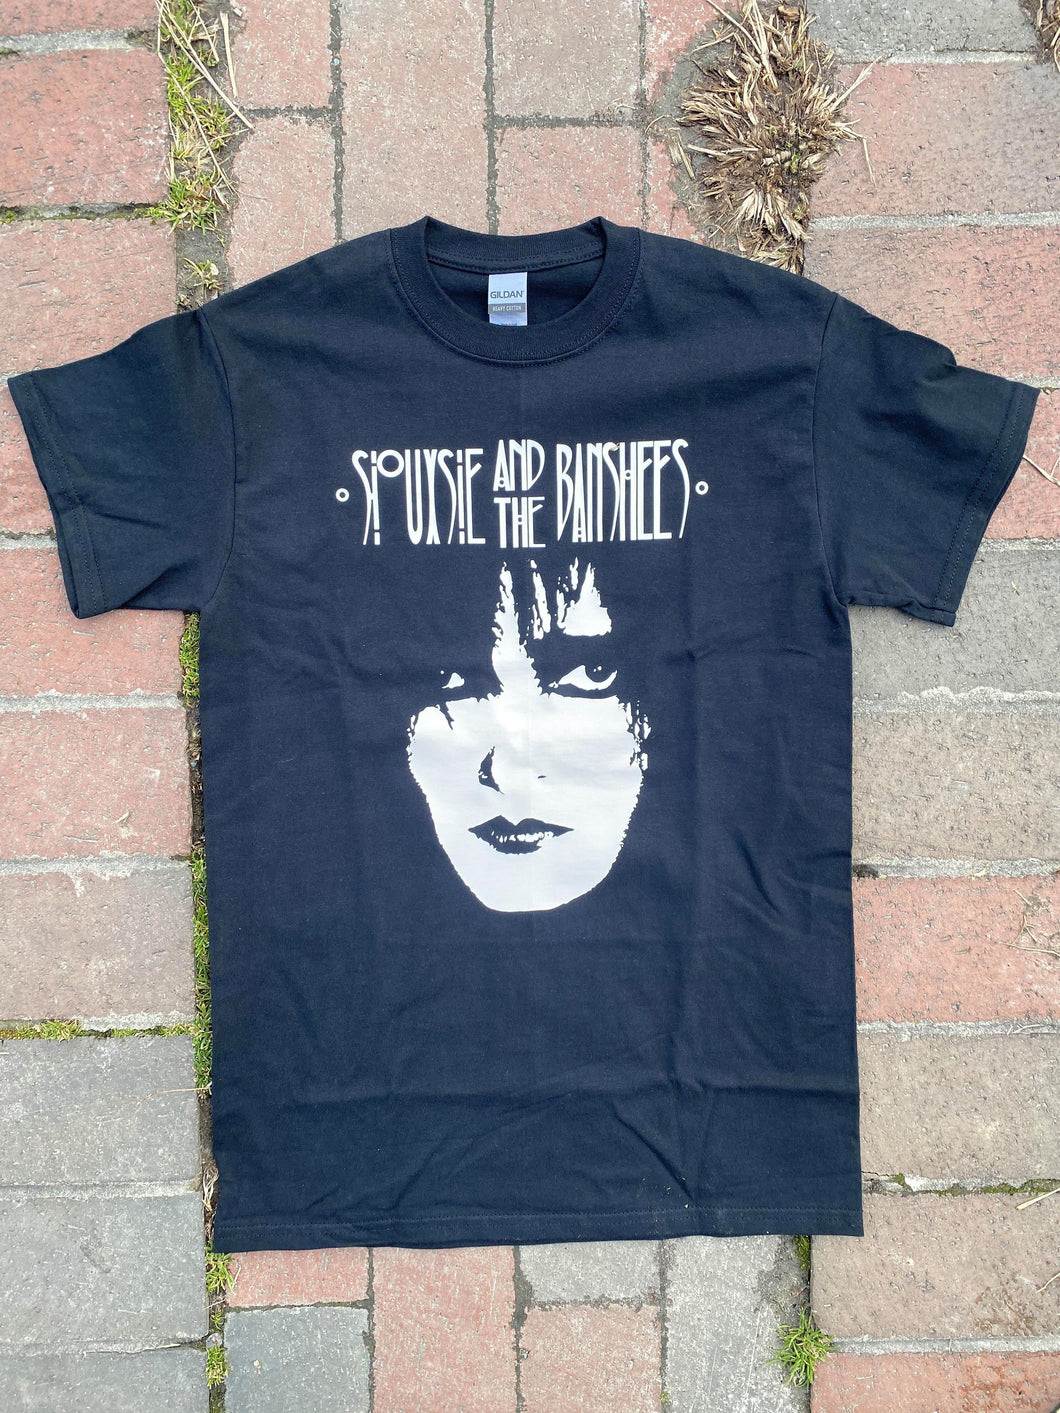 Siouxsie and the Banshees Sioux Shirt